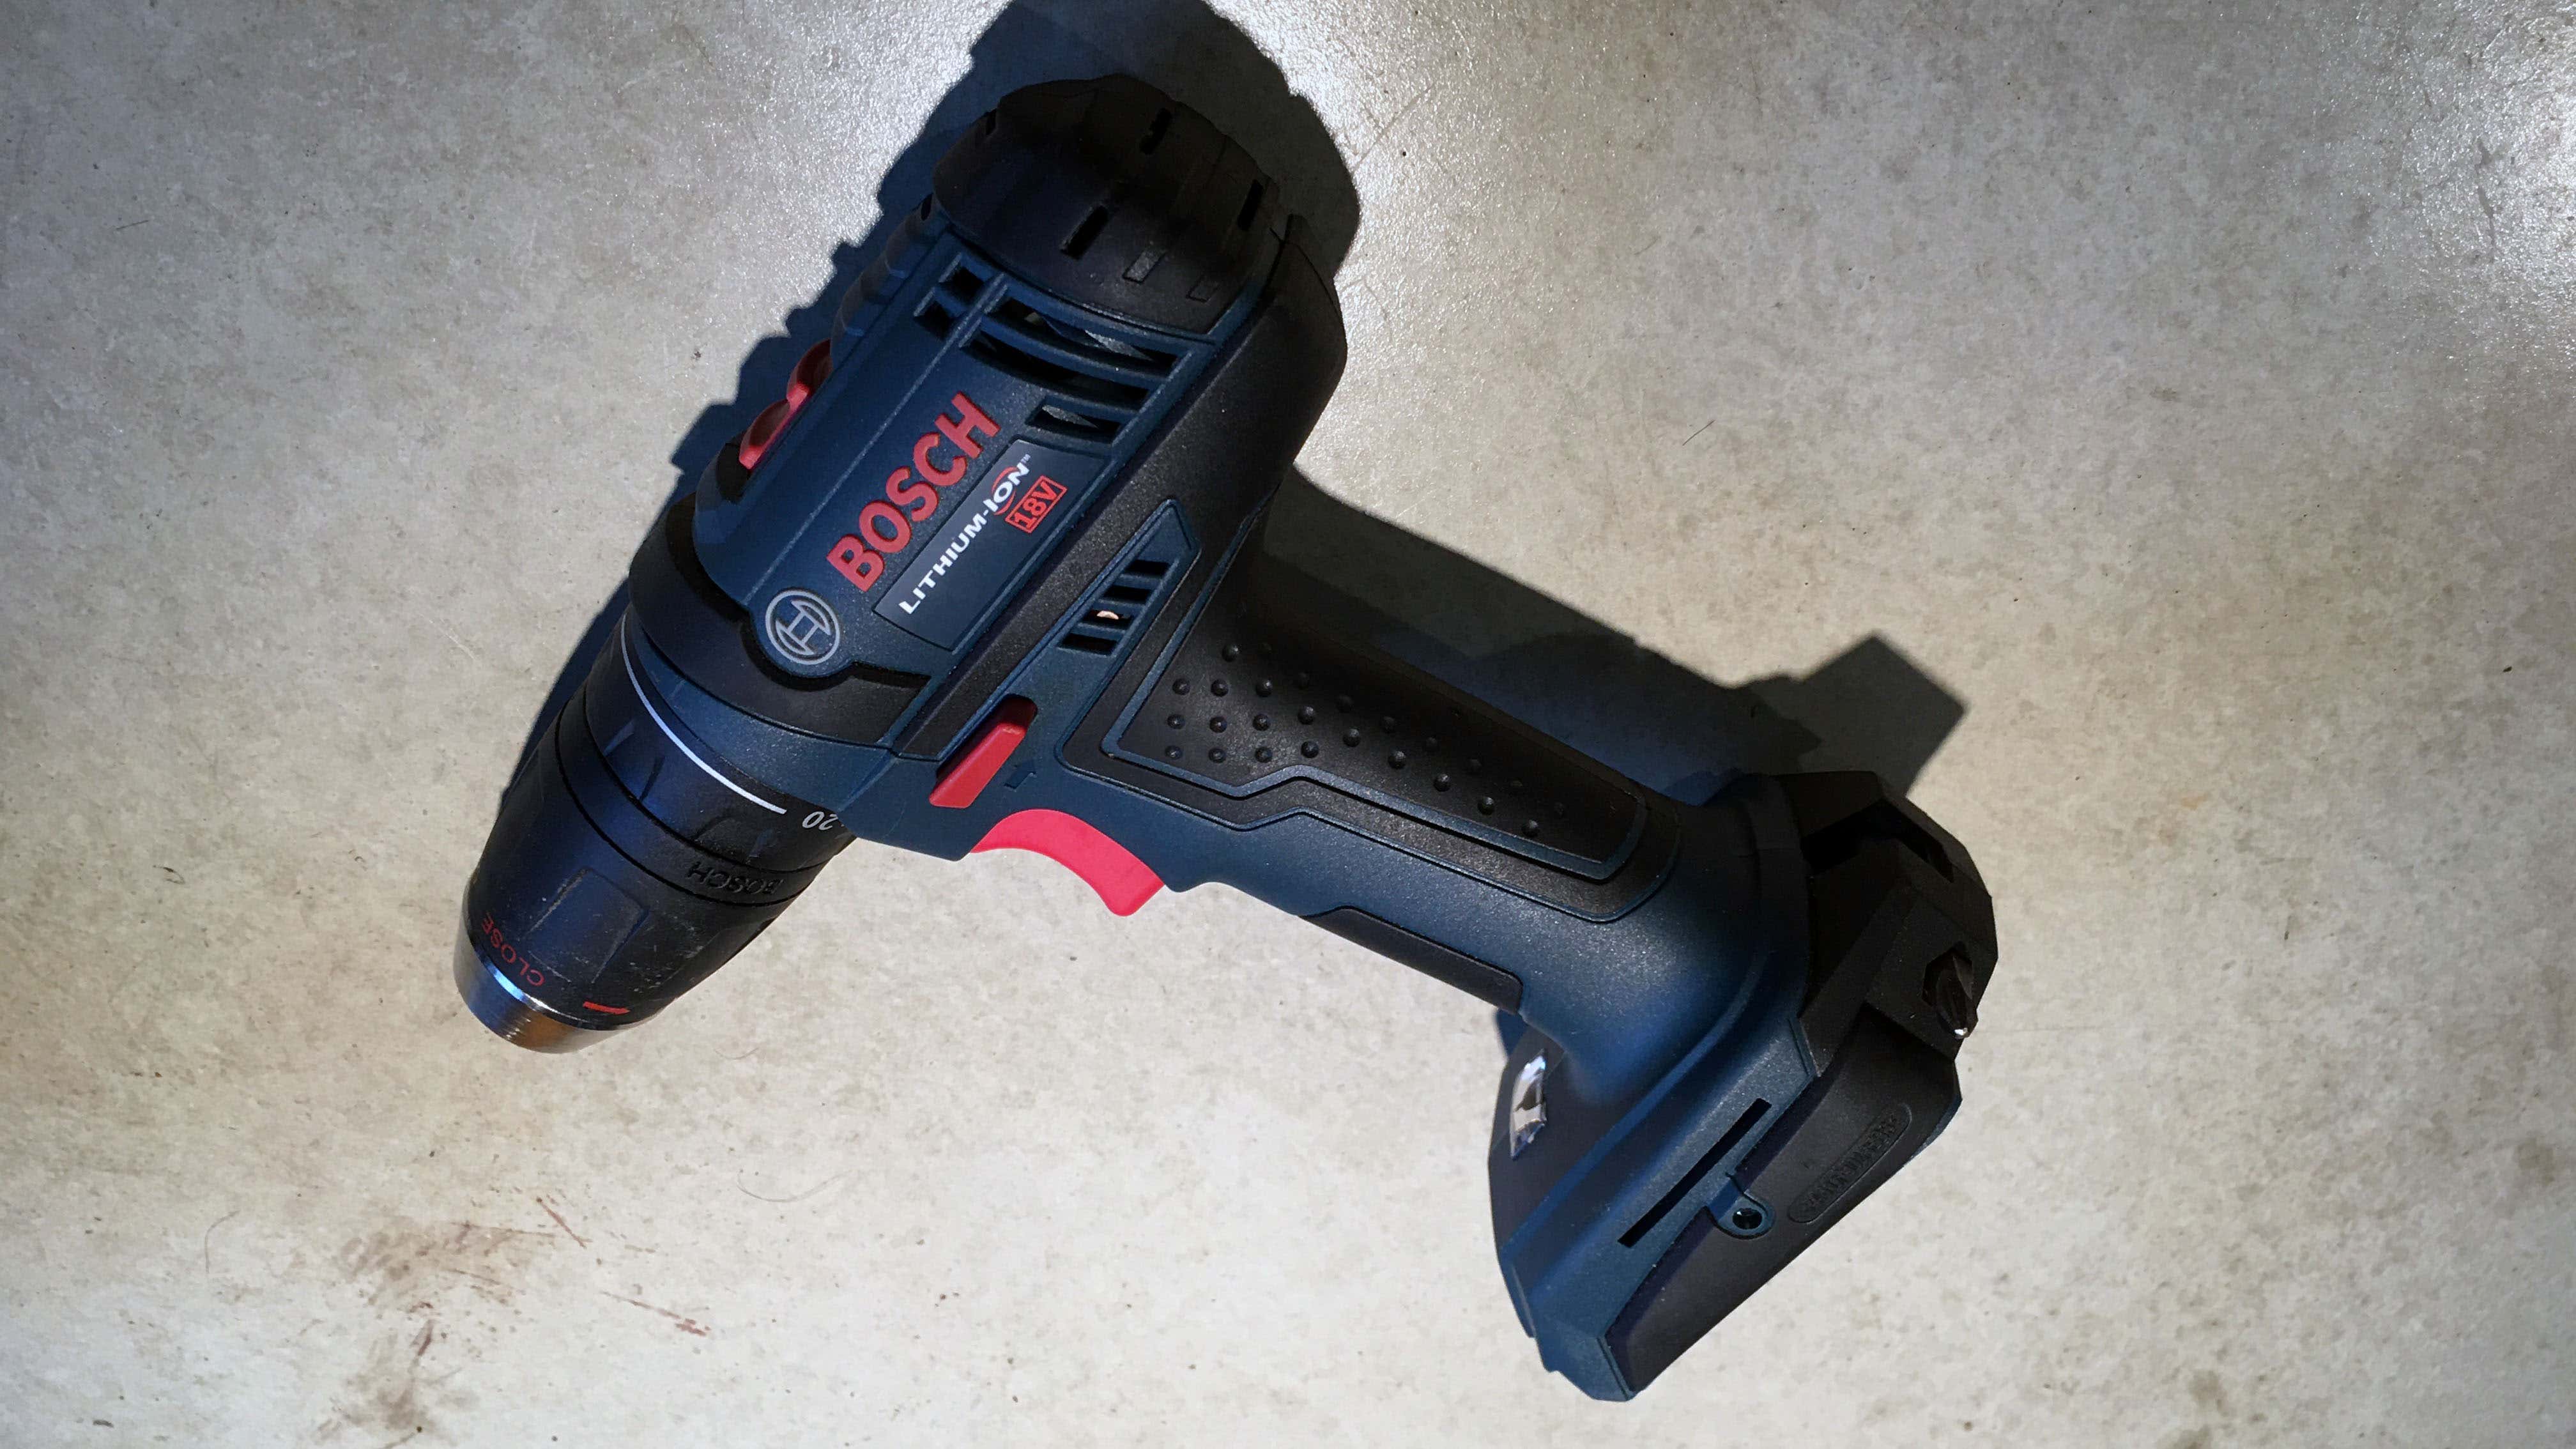 A Bosch lithium-ion cordless drill on a concrete counter.